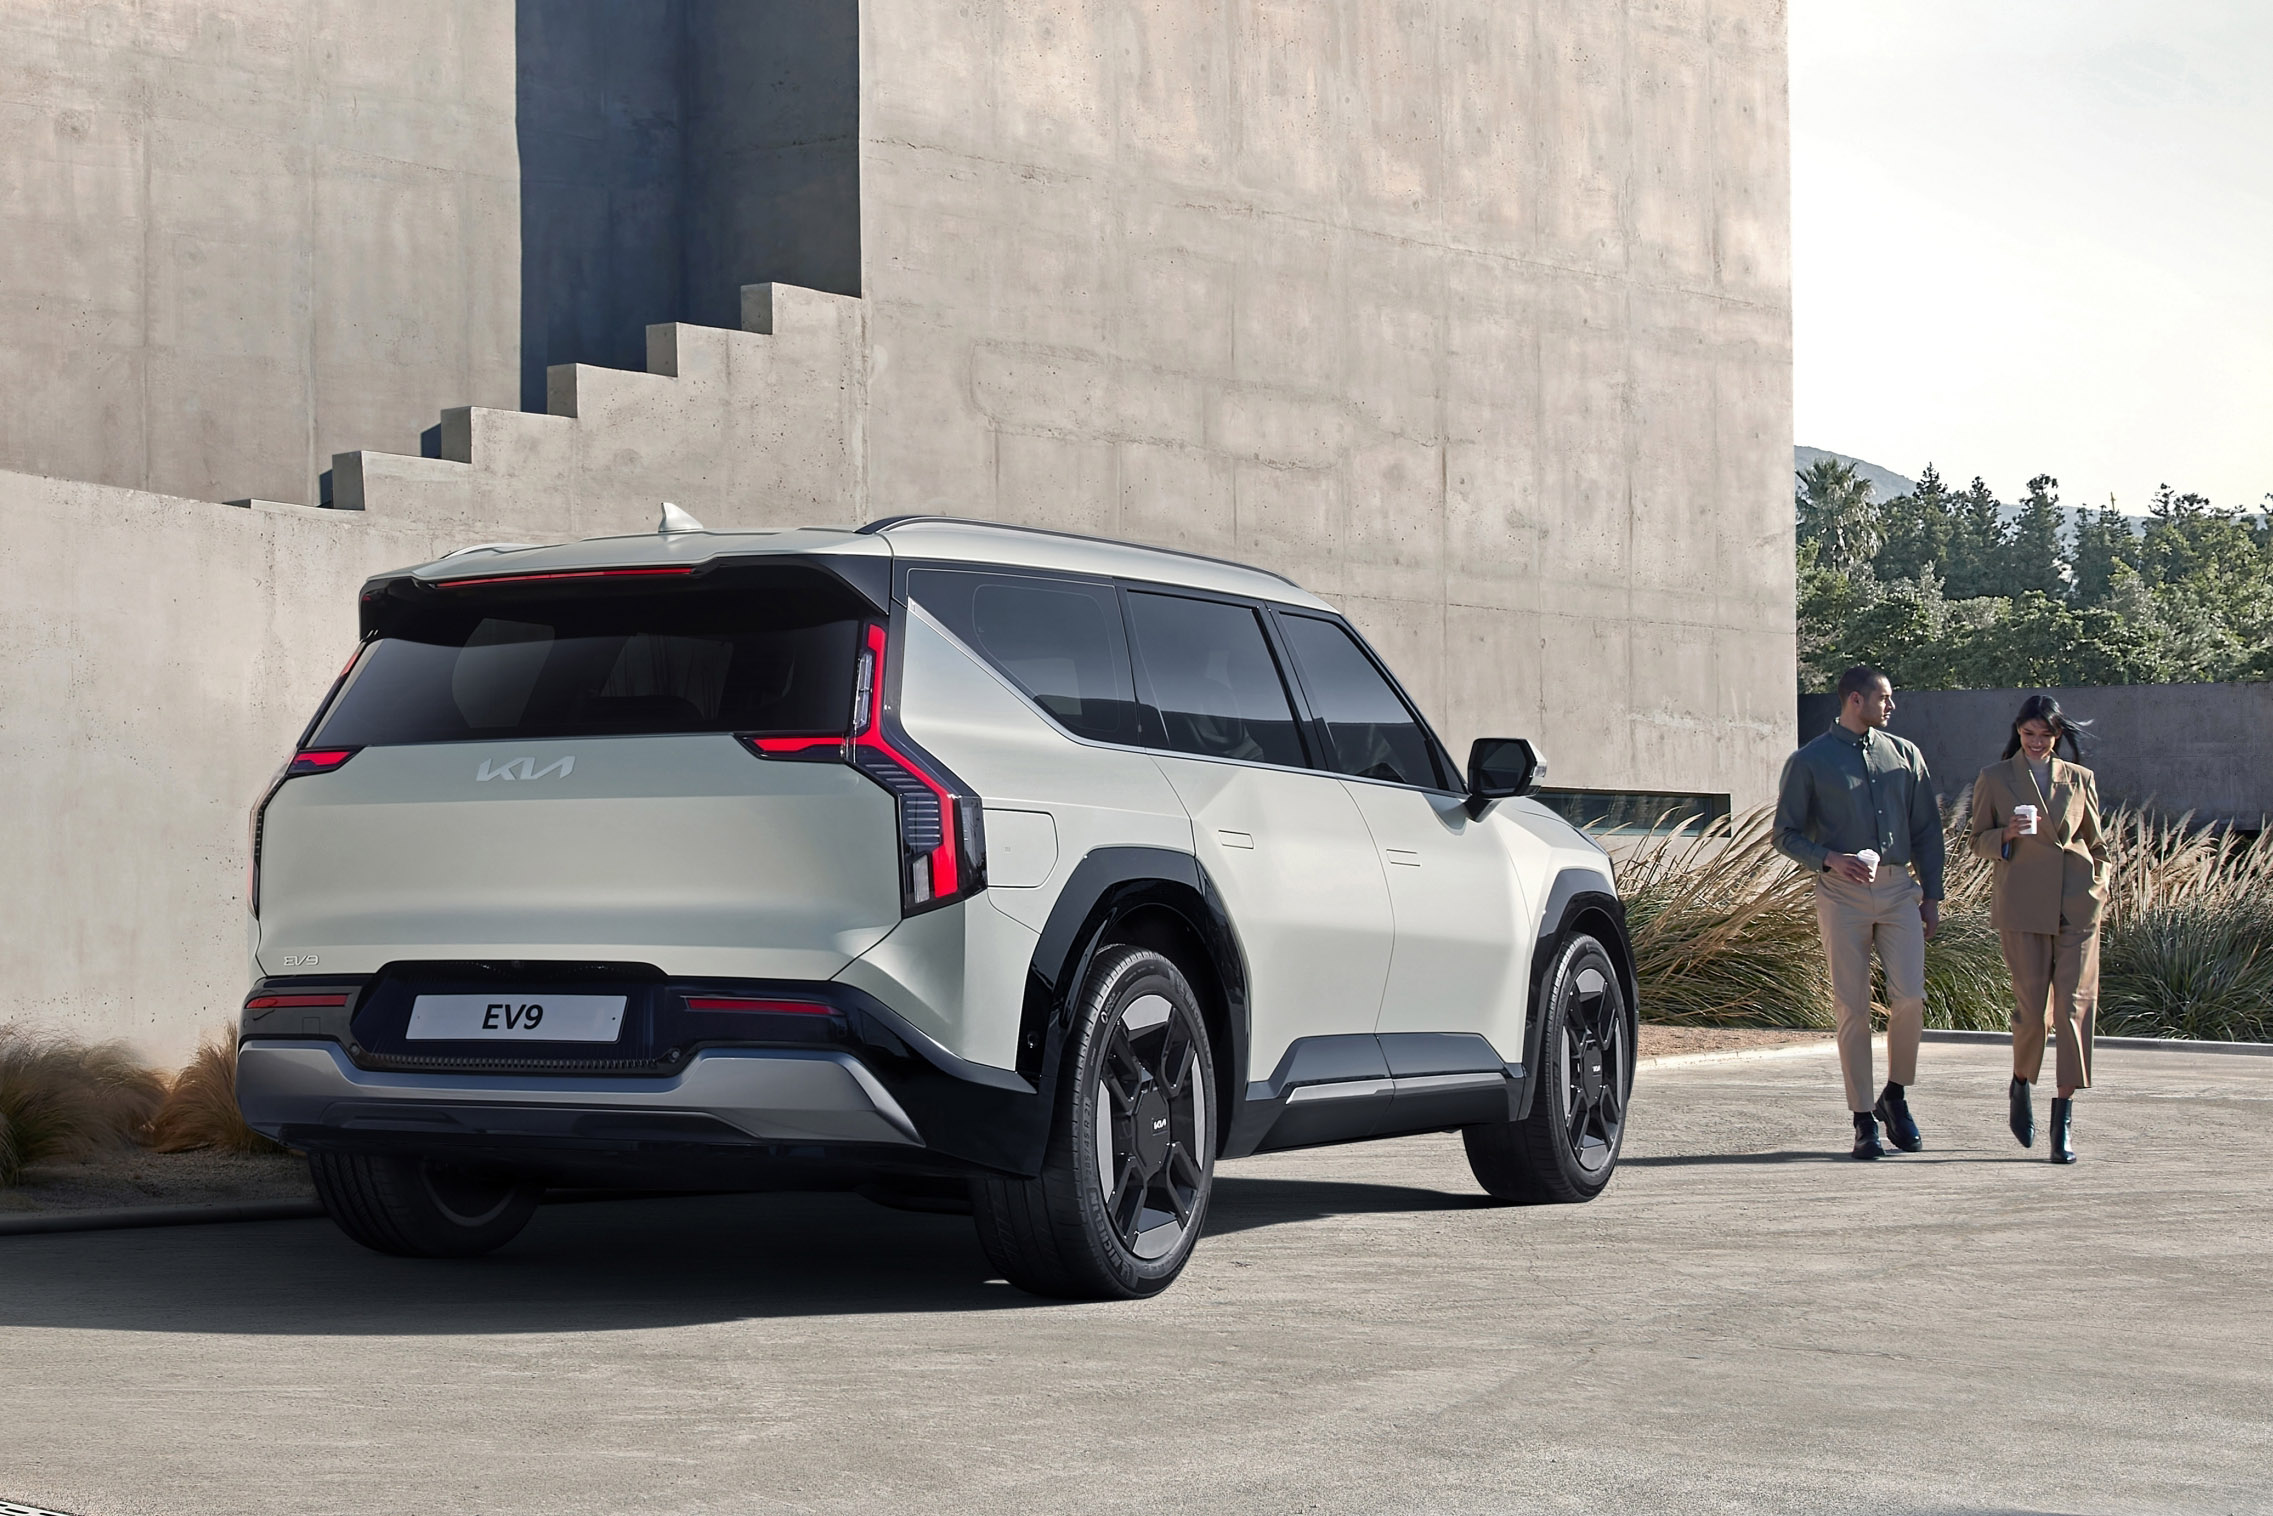 Kia's EV9 electric SUV features three rows of seats and a striking design